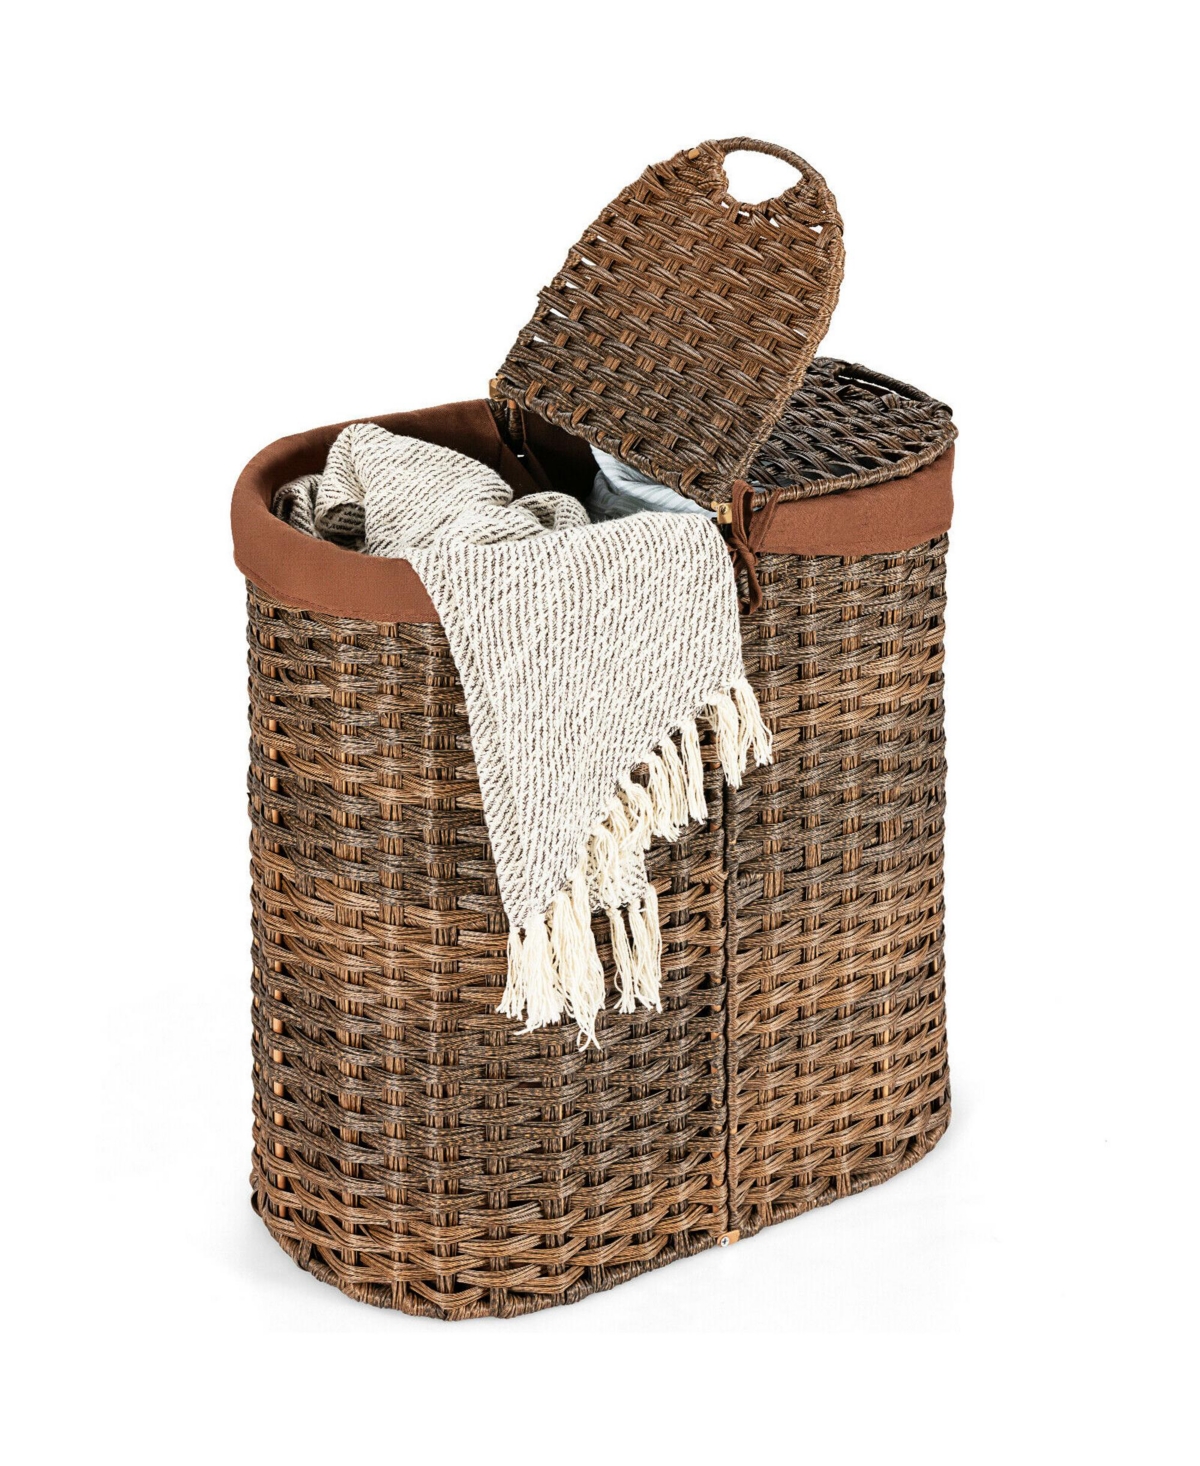 Handwoven Laundry Hamper Laundry Basket w/2 Removable Liner Bags - Brown